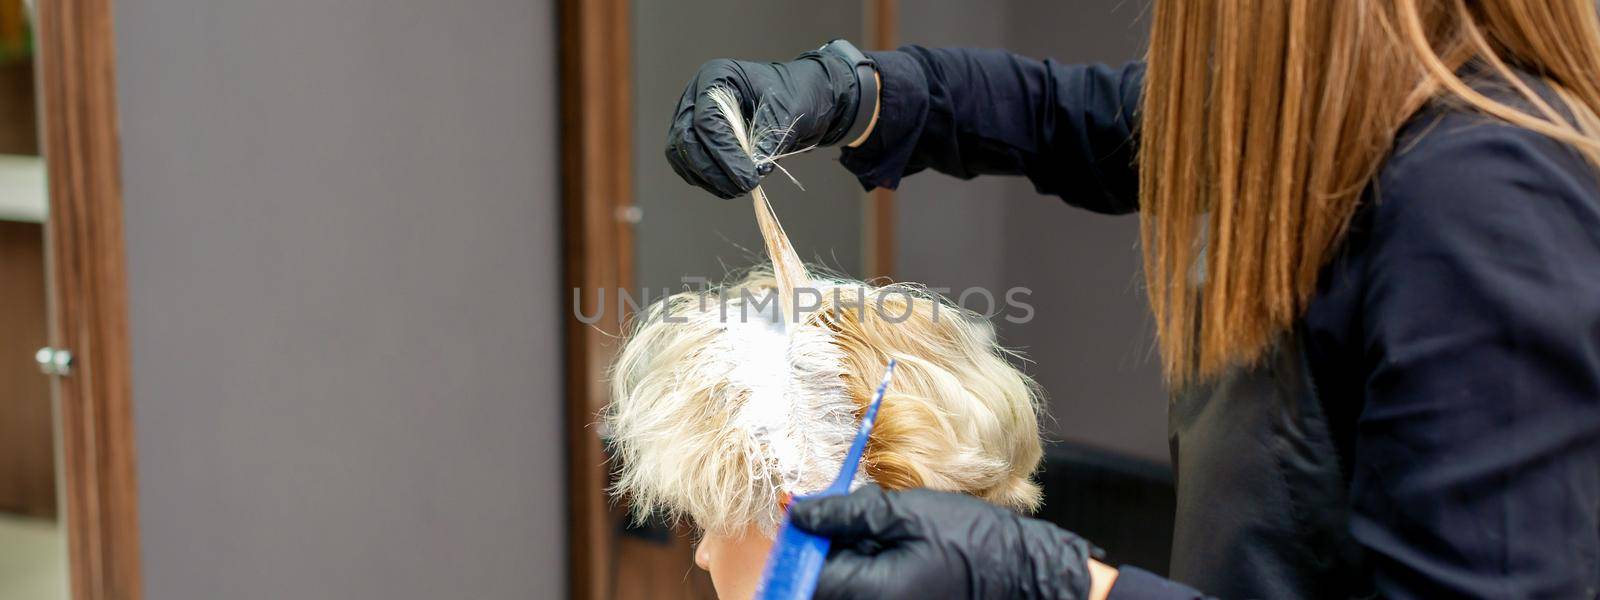 Coloring female hair in the hair salon. Young woman having her hair dyed by beautician at the beauty parlor. by okskukuruza